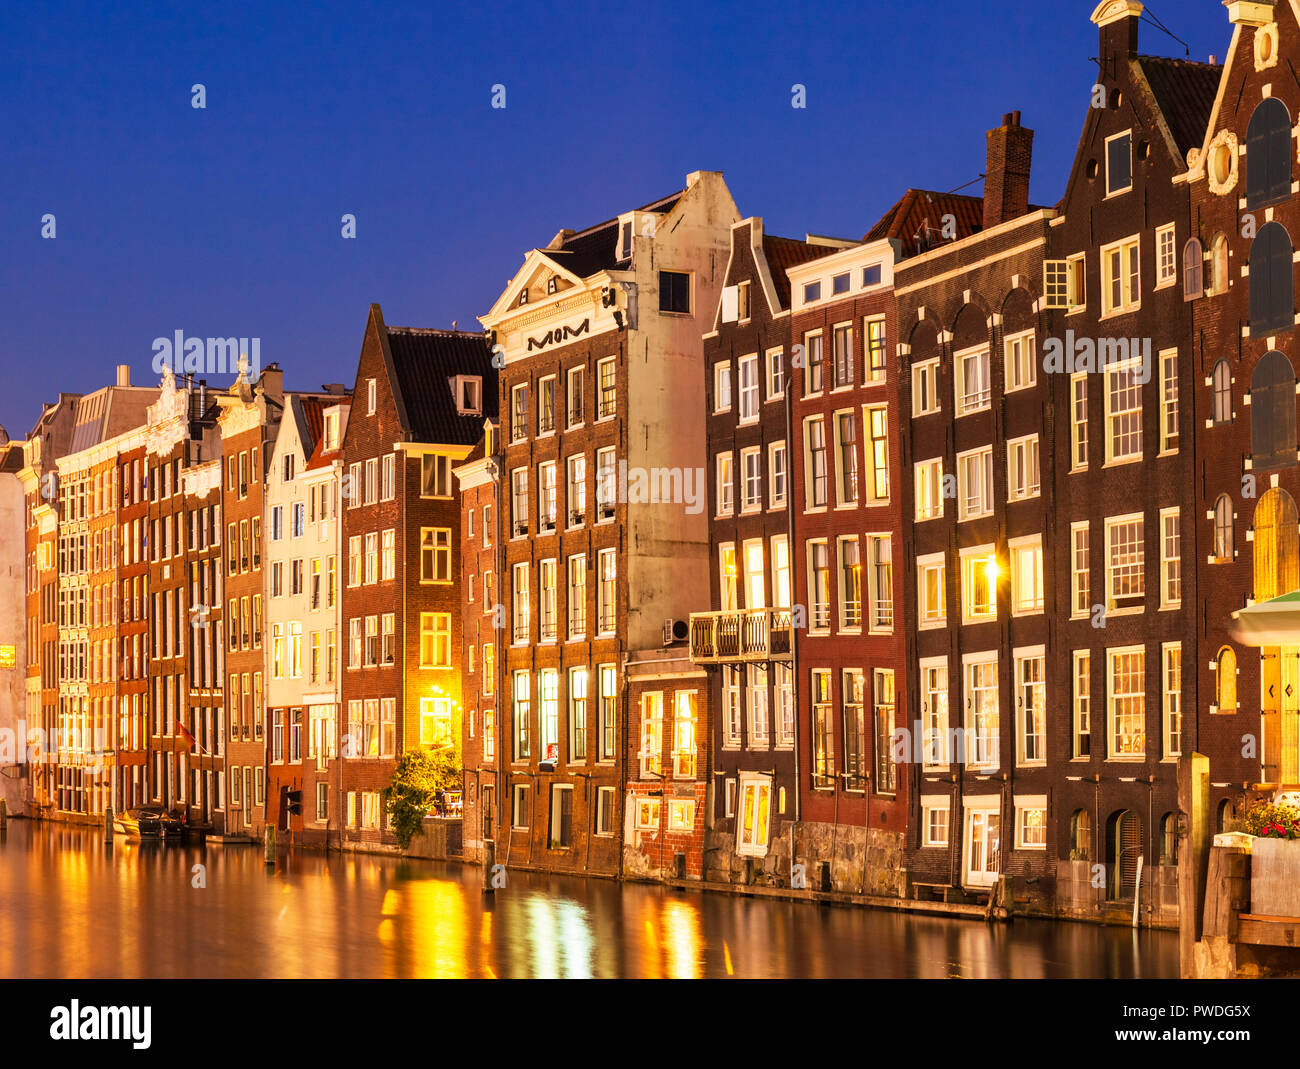 Amsterdam houses on Damrak illuminated lit up at night houses with dutch architecture by the canal Amsterdam Holland Netherlands EU Europe Stock Photo